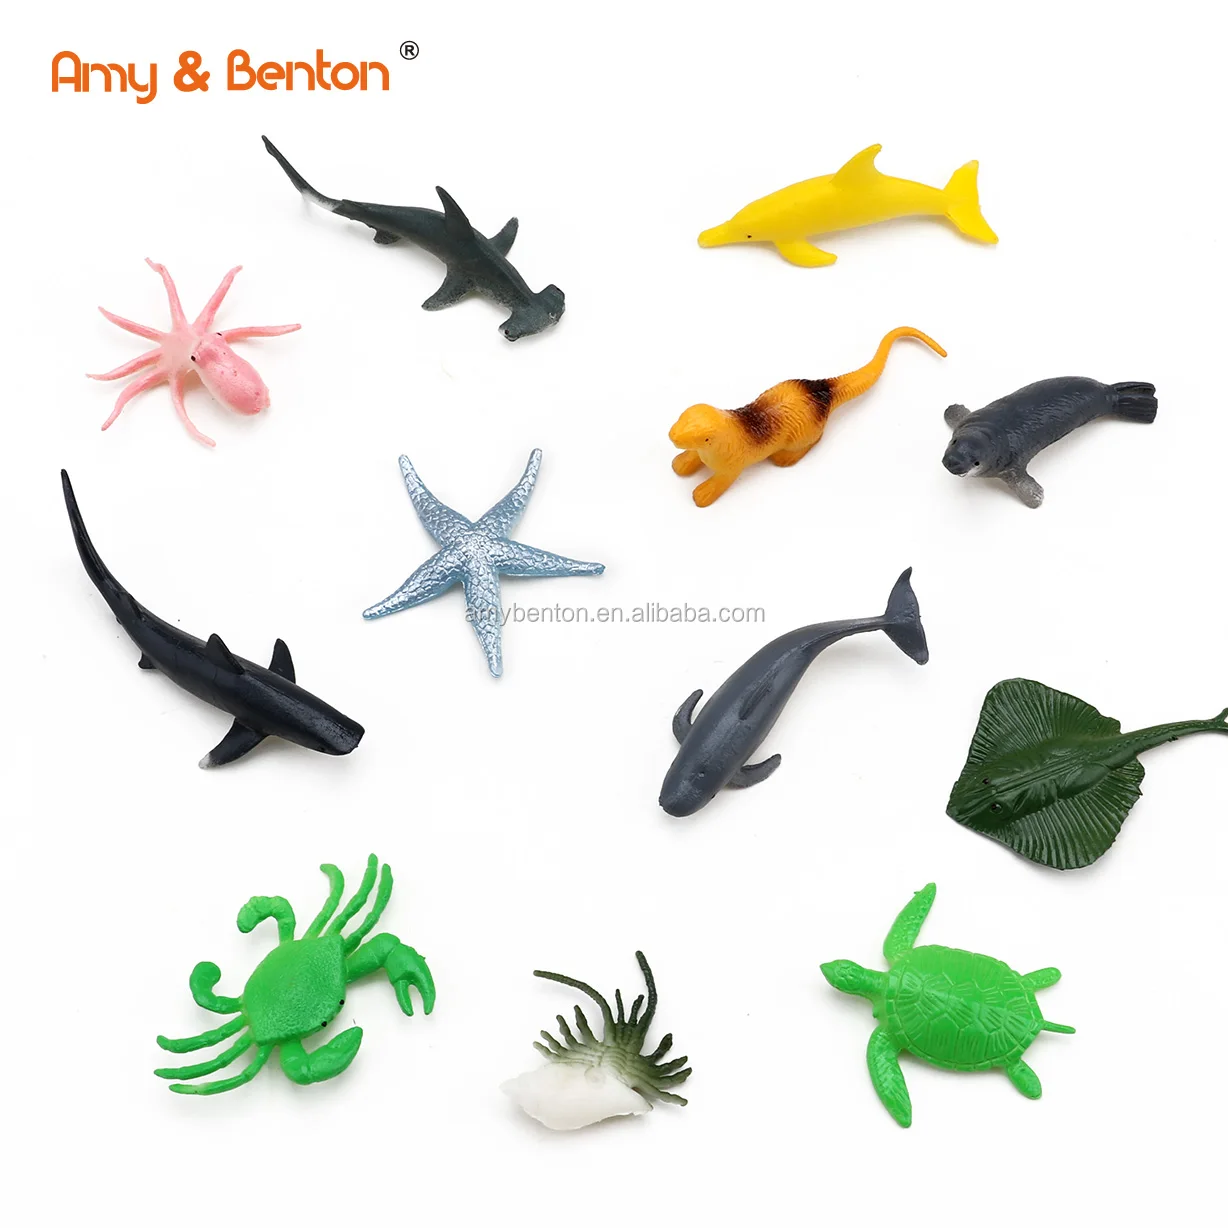 12types Sea Animals Figure Toys,3d Realistic Plastic Marine Toy Figures,Ocean  Underwater Creatures Action Models - Buy Sea Ocean Animal,3d Animal  Model,Realistic Animal Toy Product on 